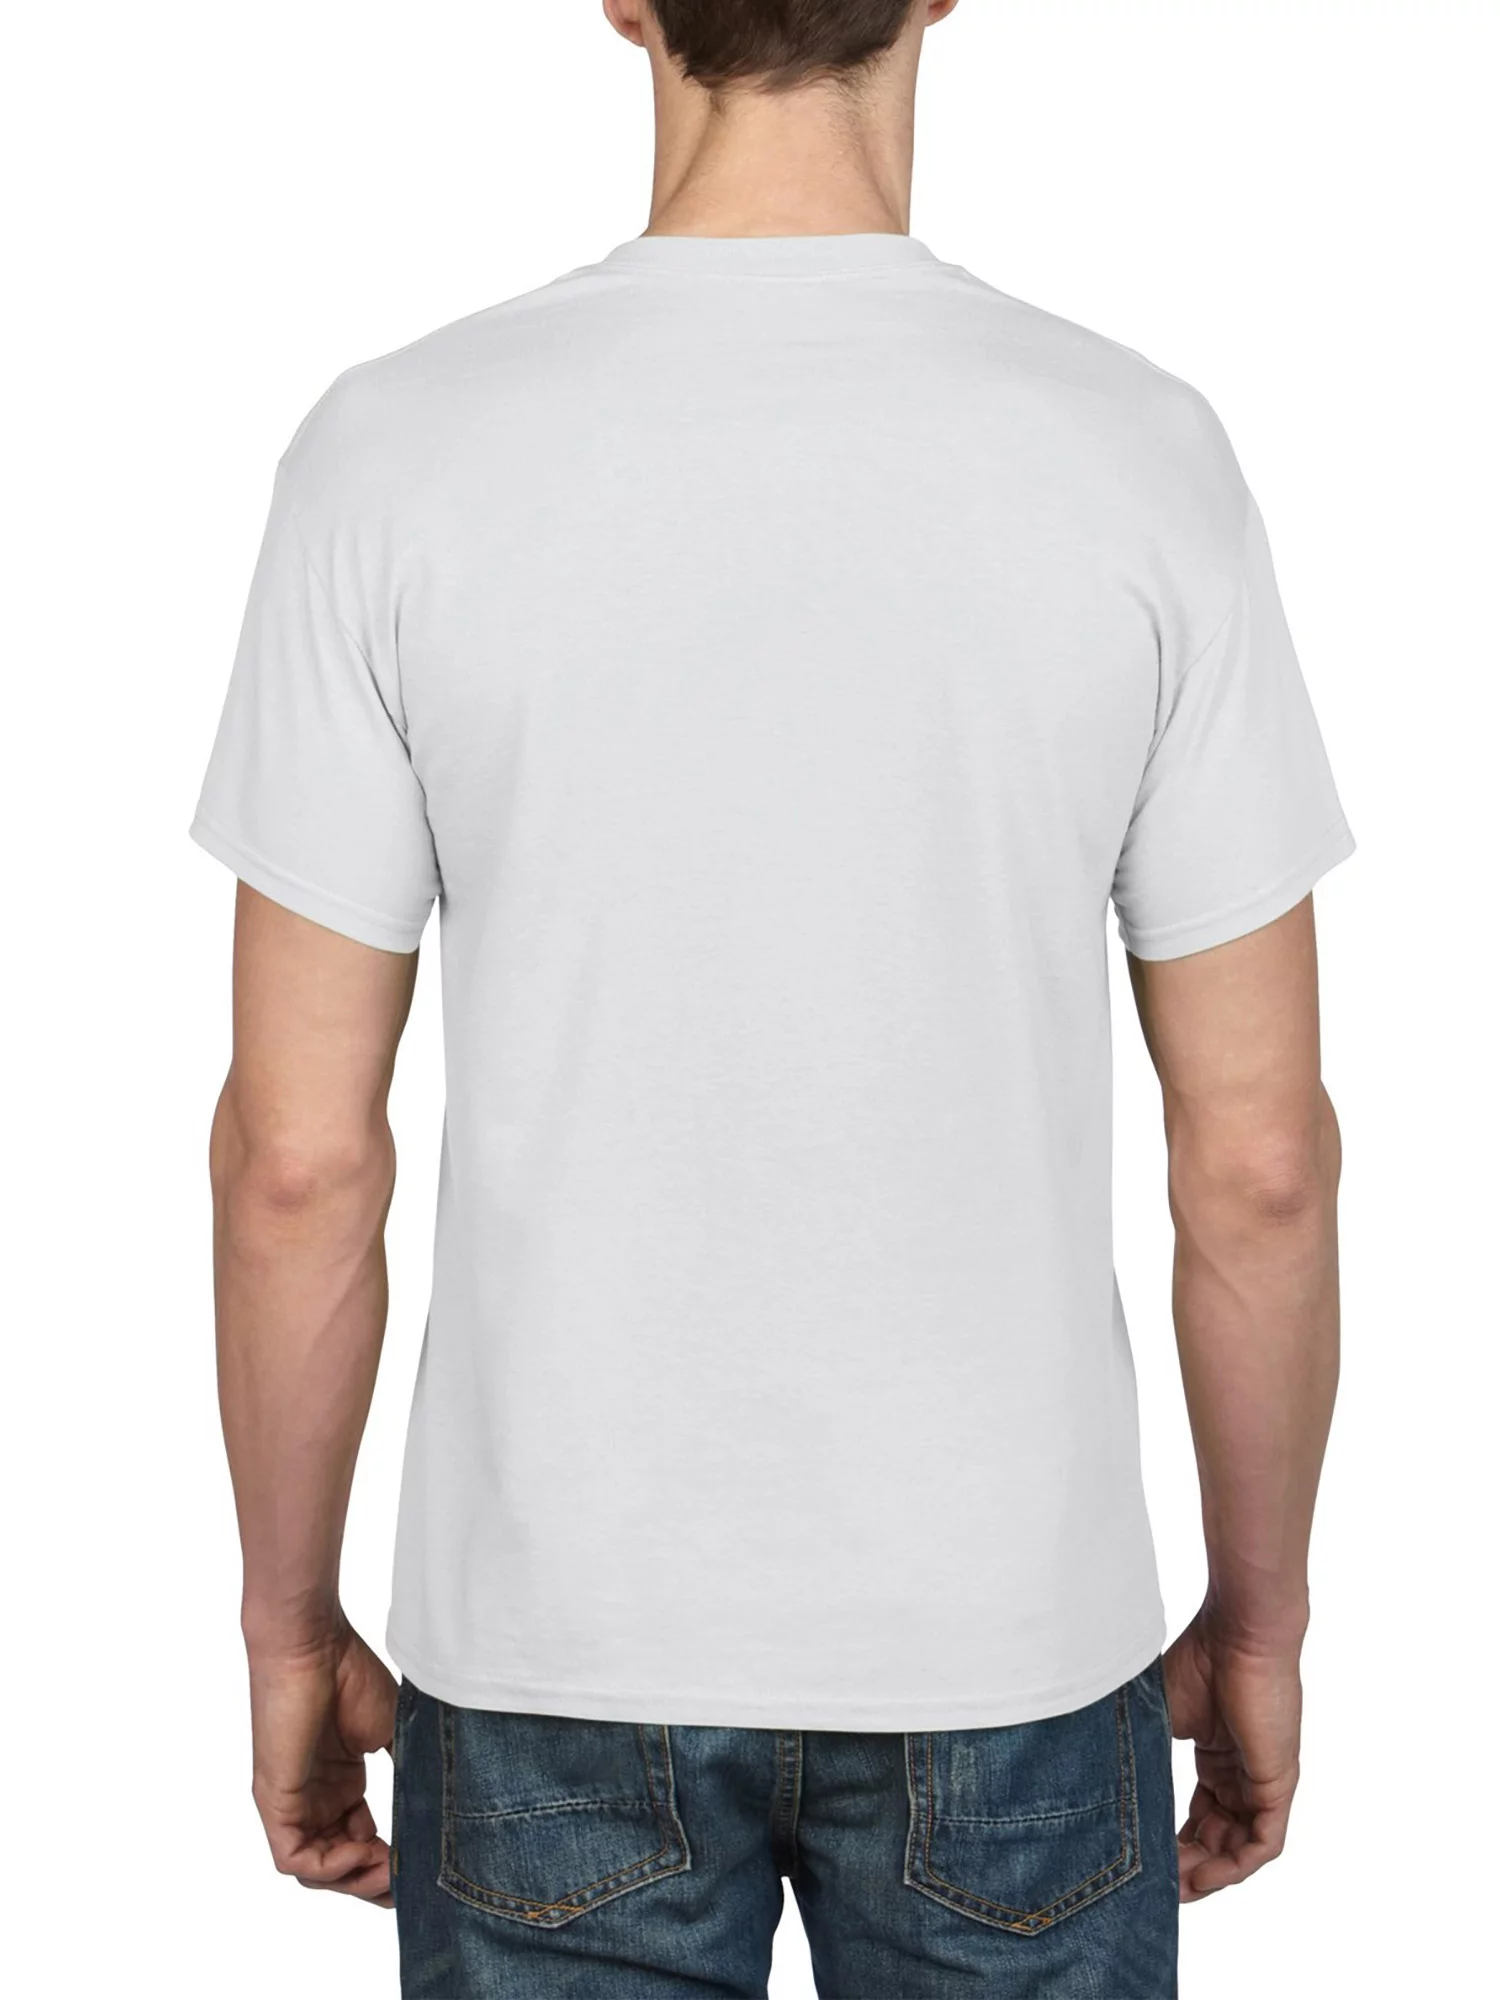 Adult Short Sleeve Crew T-Shirts for Crafting - White, Size M, Soft Cotton, Classic Fit, 3-Pack Blank Tees - Walmart.com